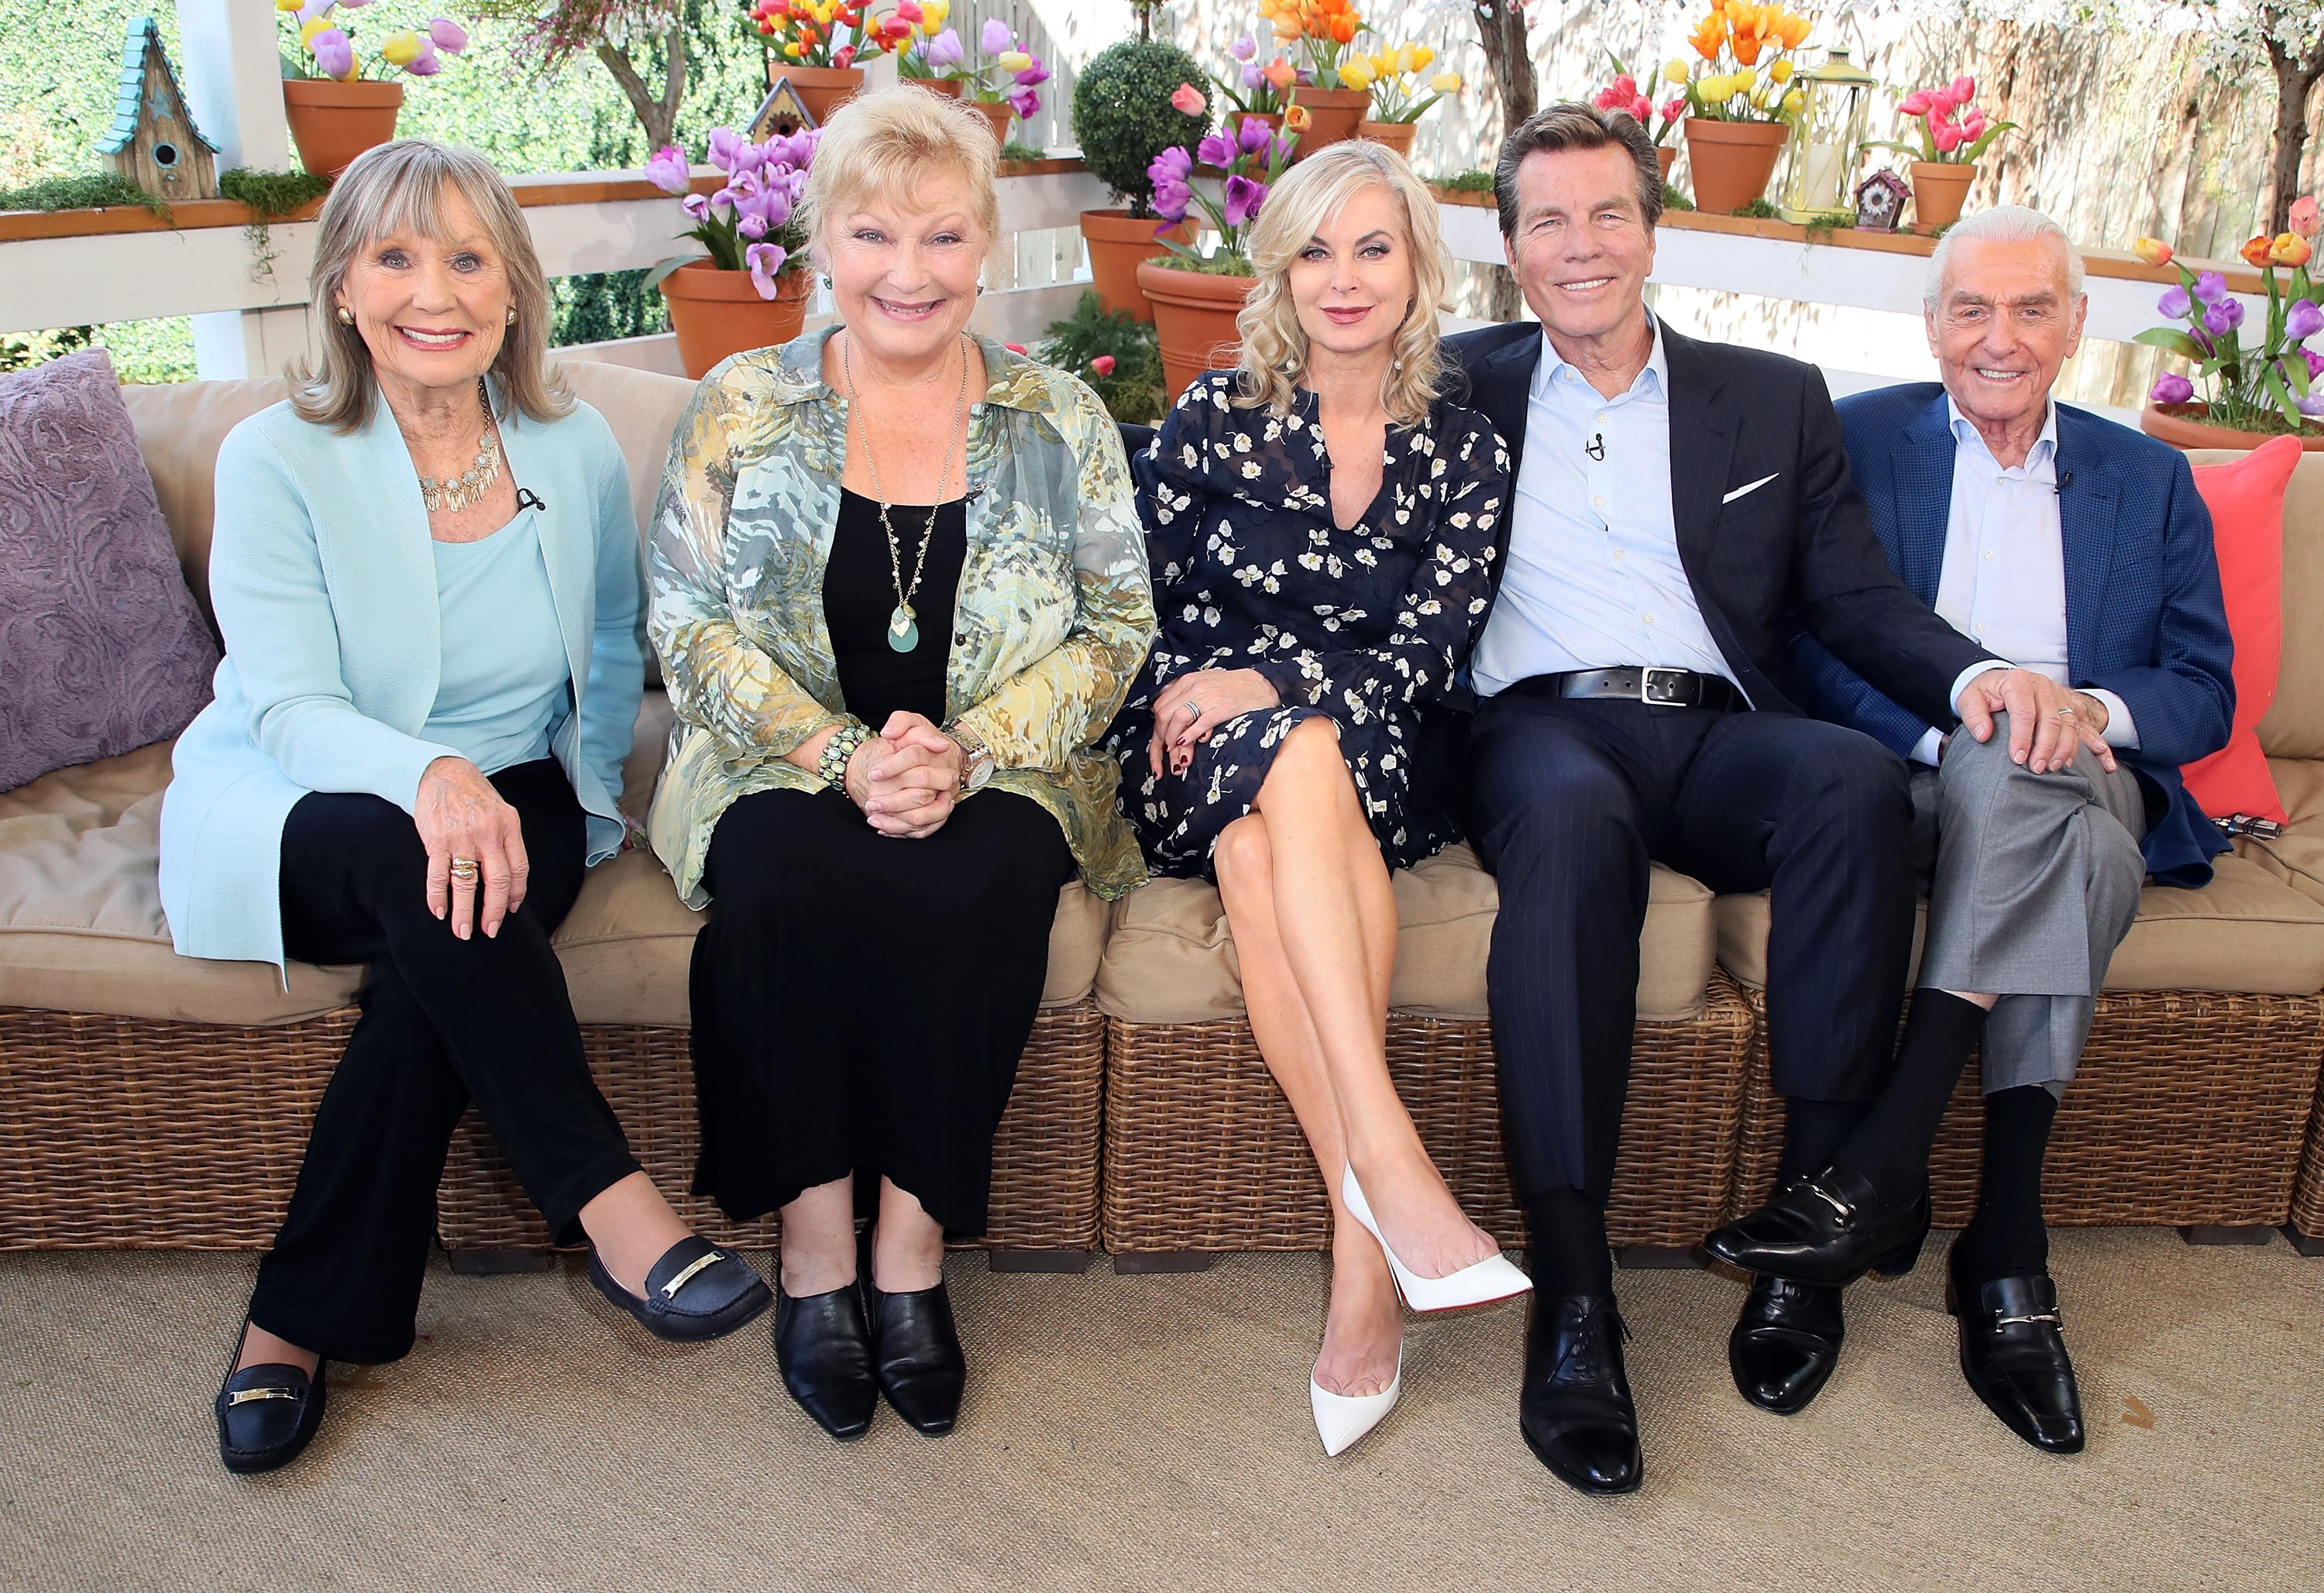 'The Young and the Restless' actors Marla Adams, Beth Maitland, Eileen Davidson, Peter Bergman, and Jerry Douglas